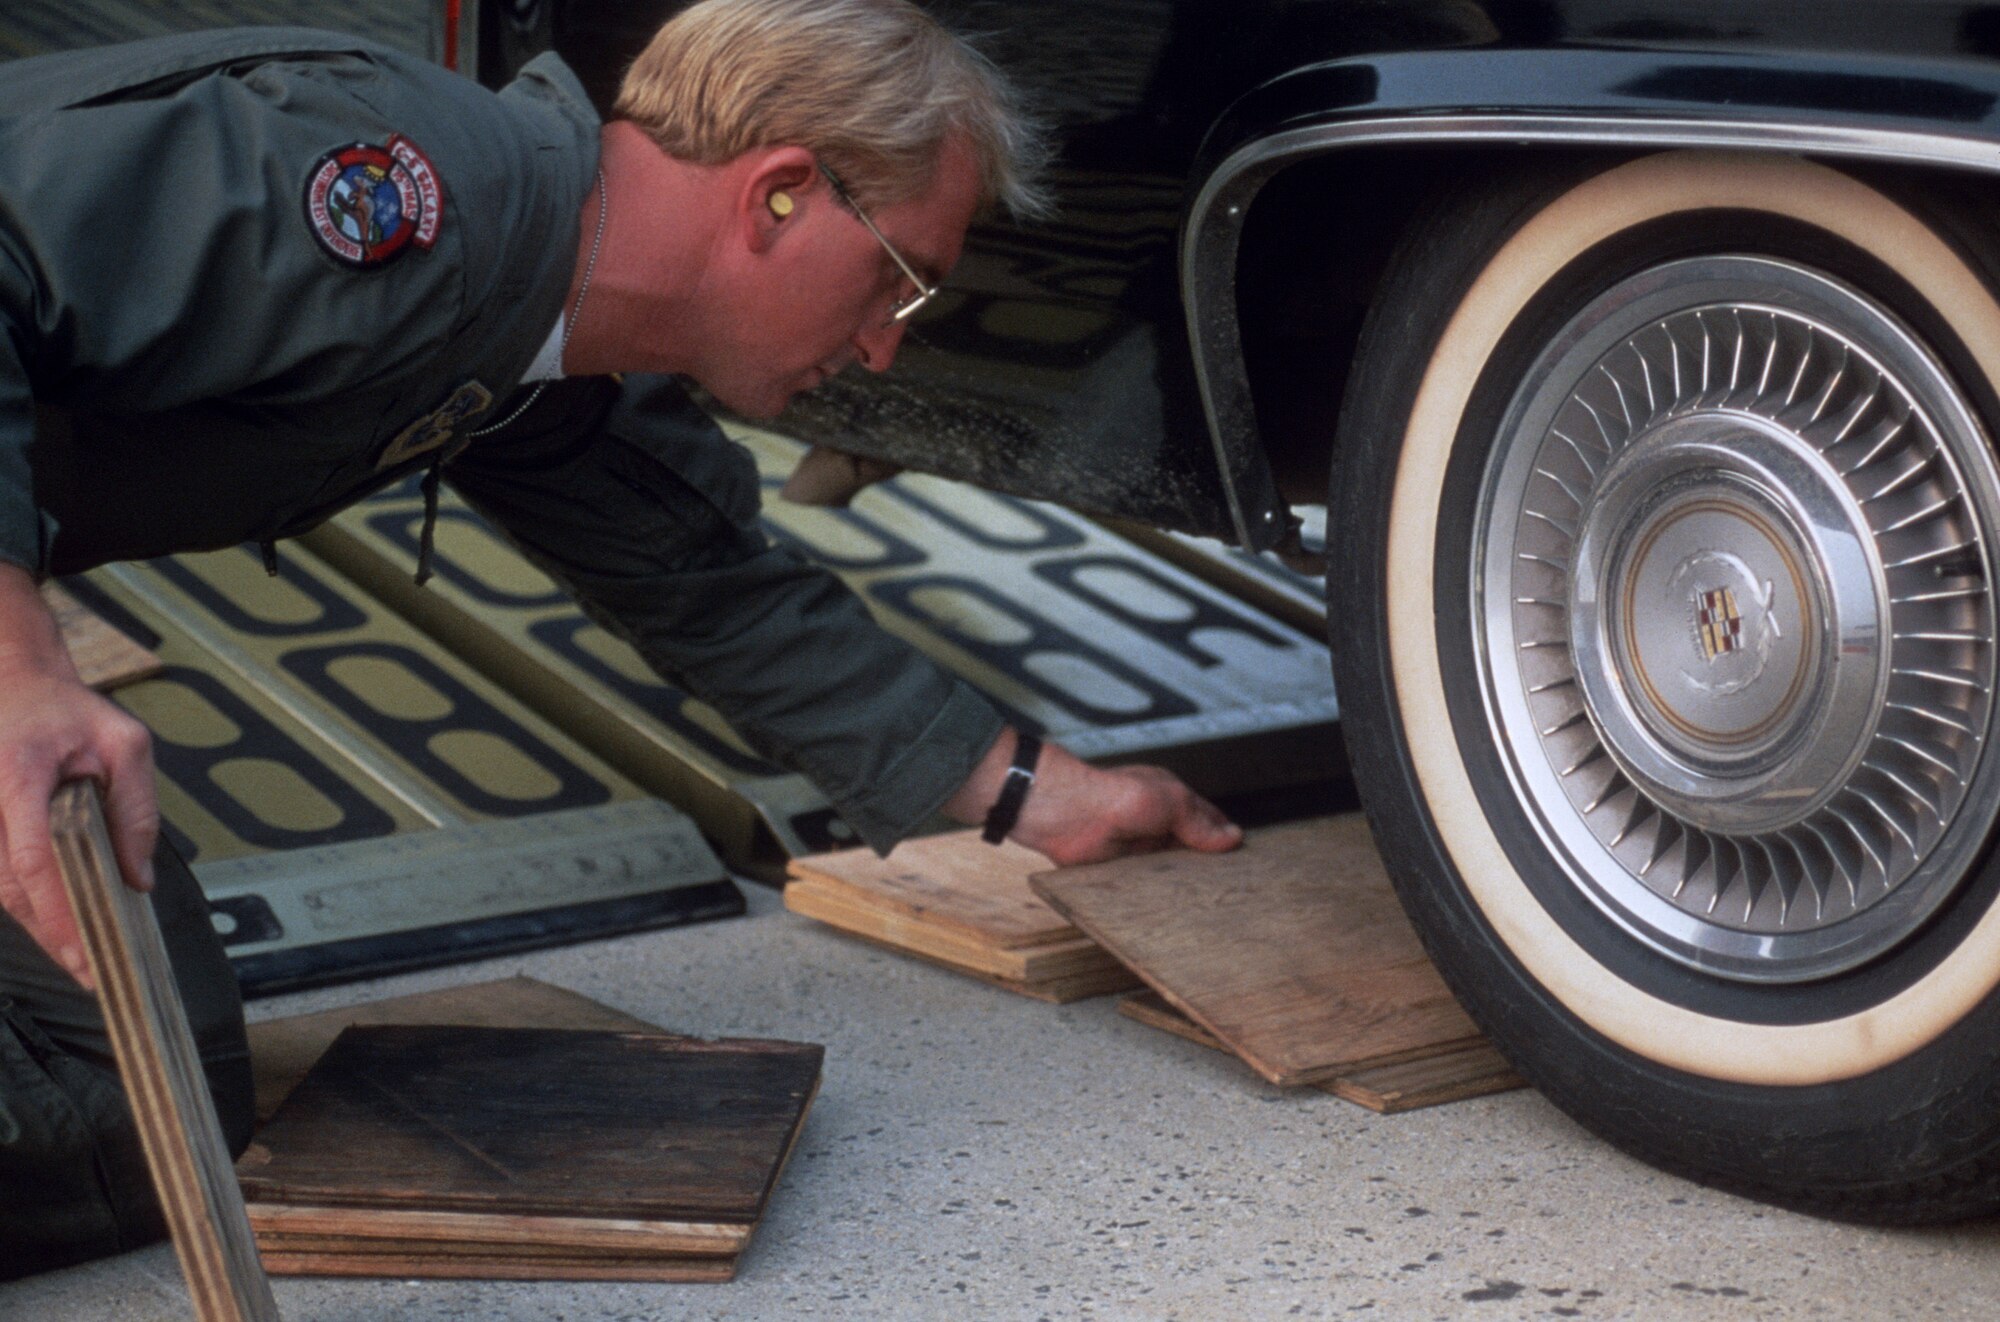 A man in uniform is placing a piece of wood near the front of a car tire so it can drive up the aircraft ramp with ease.